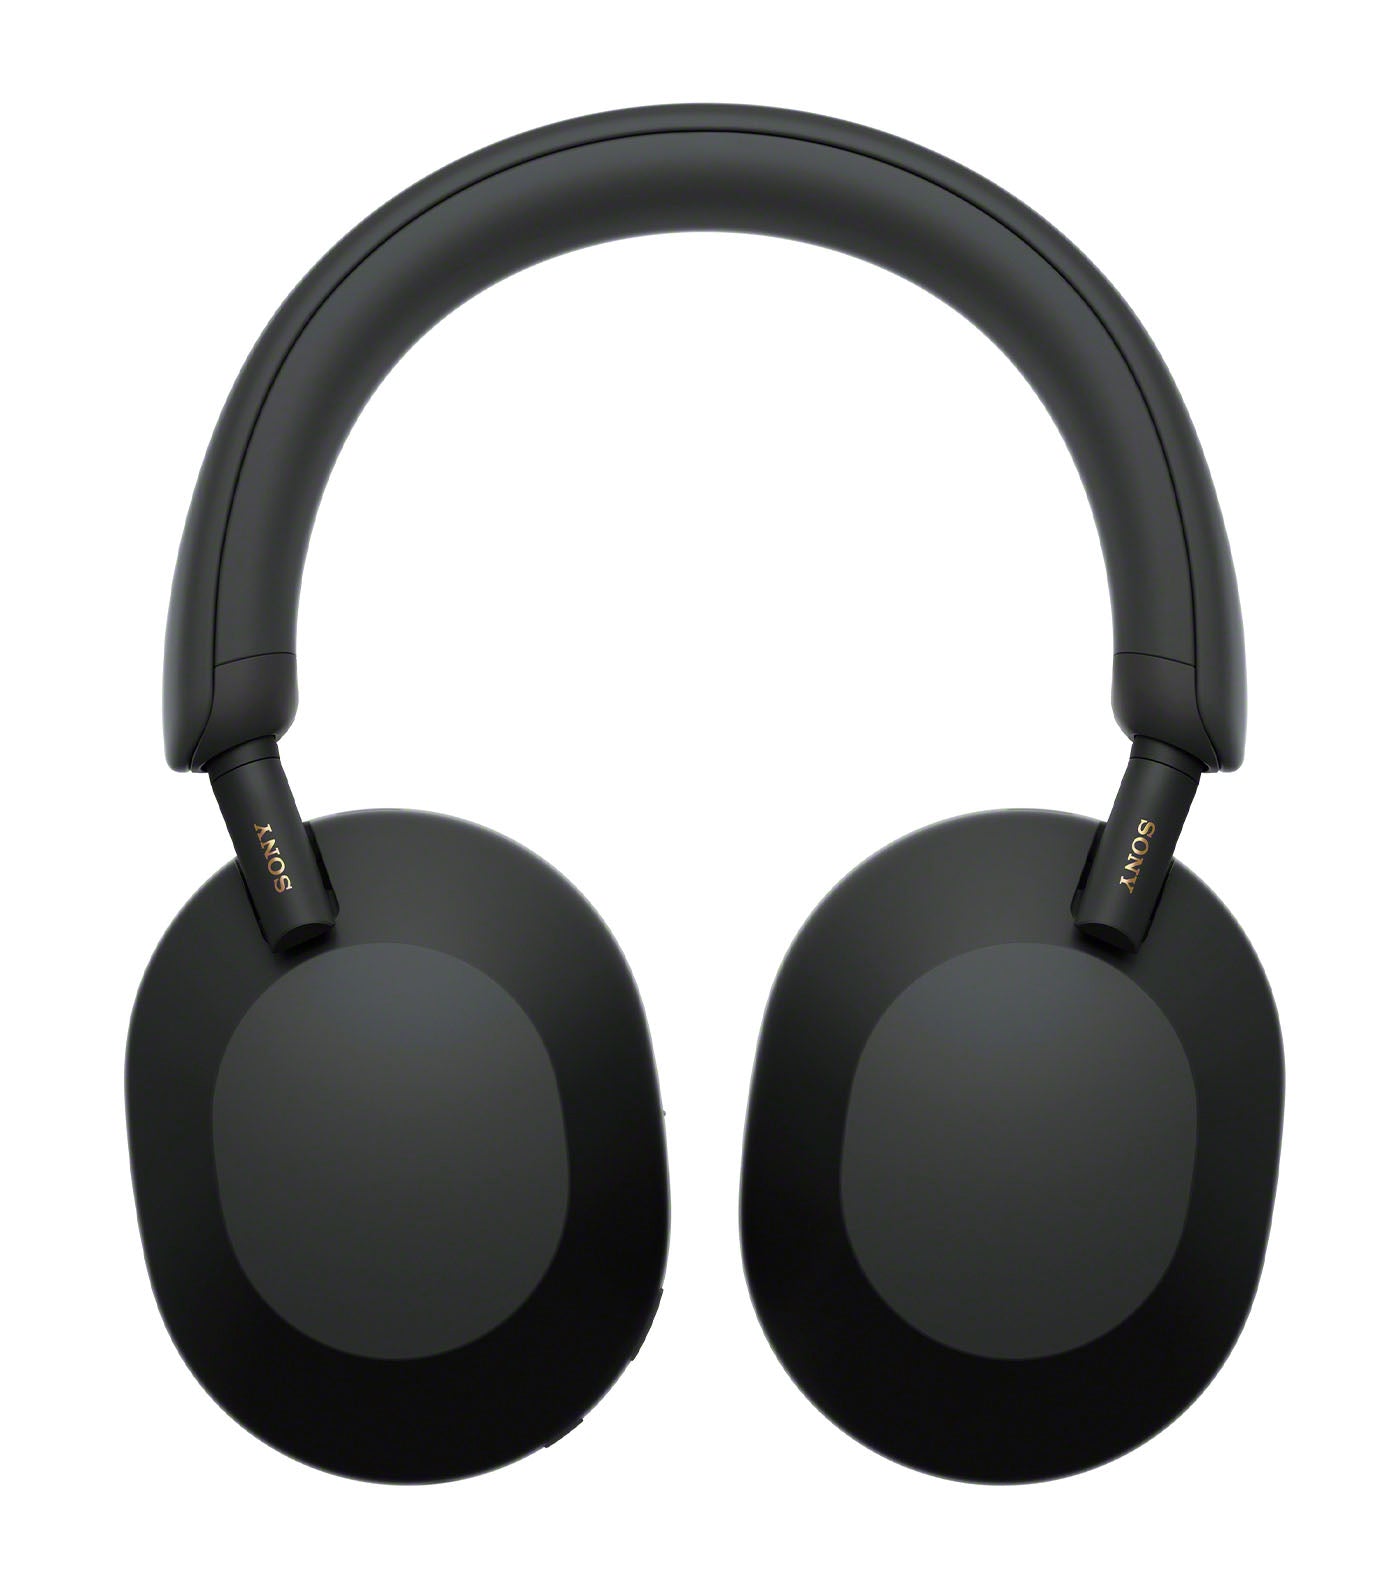 WH-1000XM5 Industry Leading Noise-Cancelling Headphones Black